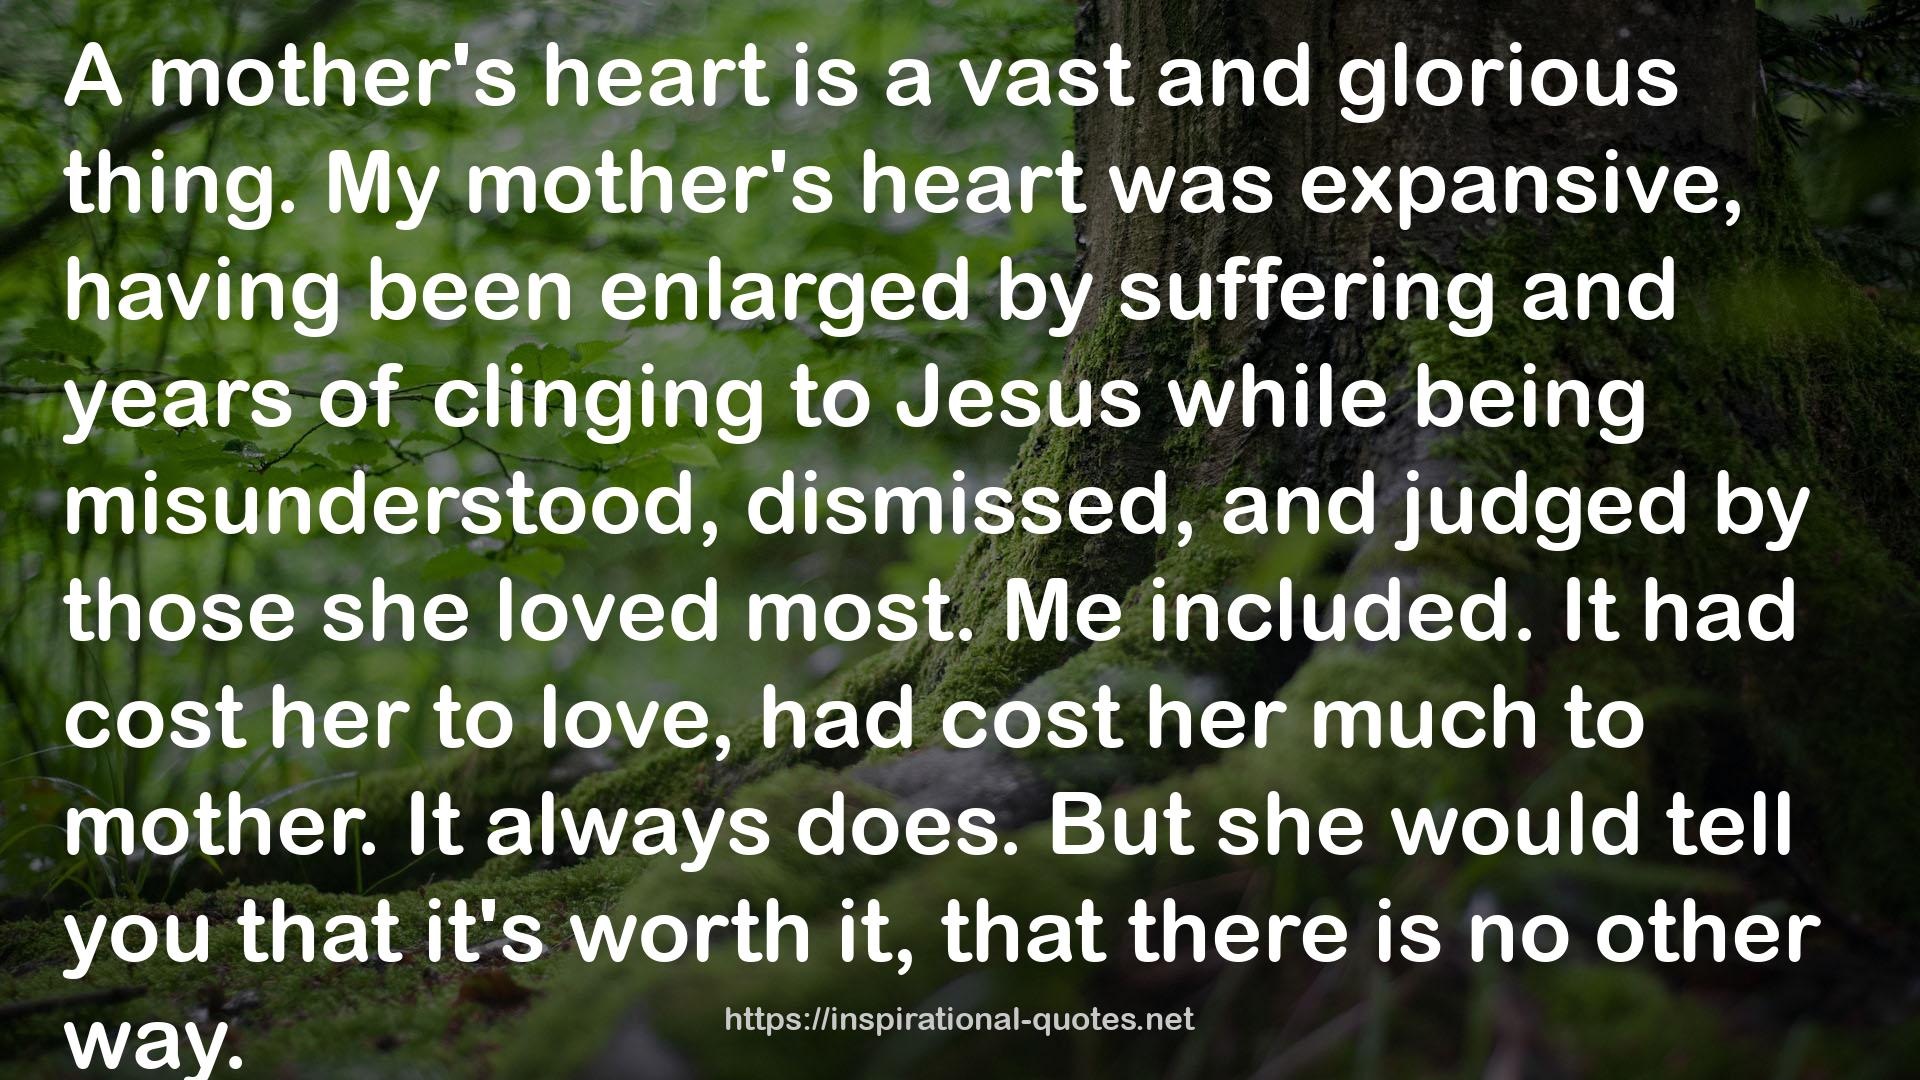 My mother's heart  QUOTES